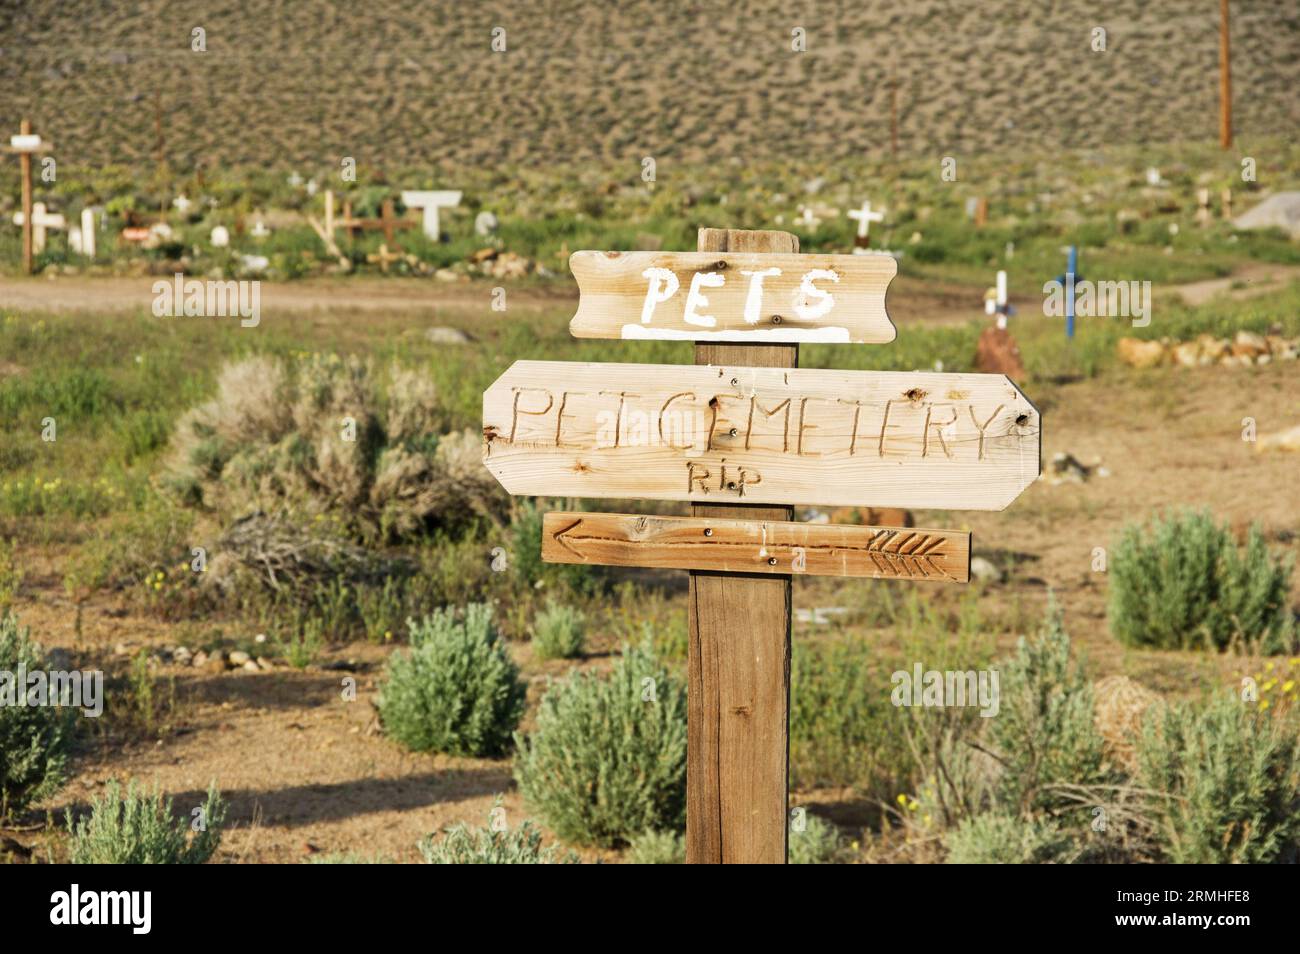 informal pet cemetary in the desert with selective focus on the pet cemetary sign Stock Photo